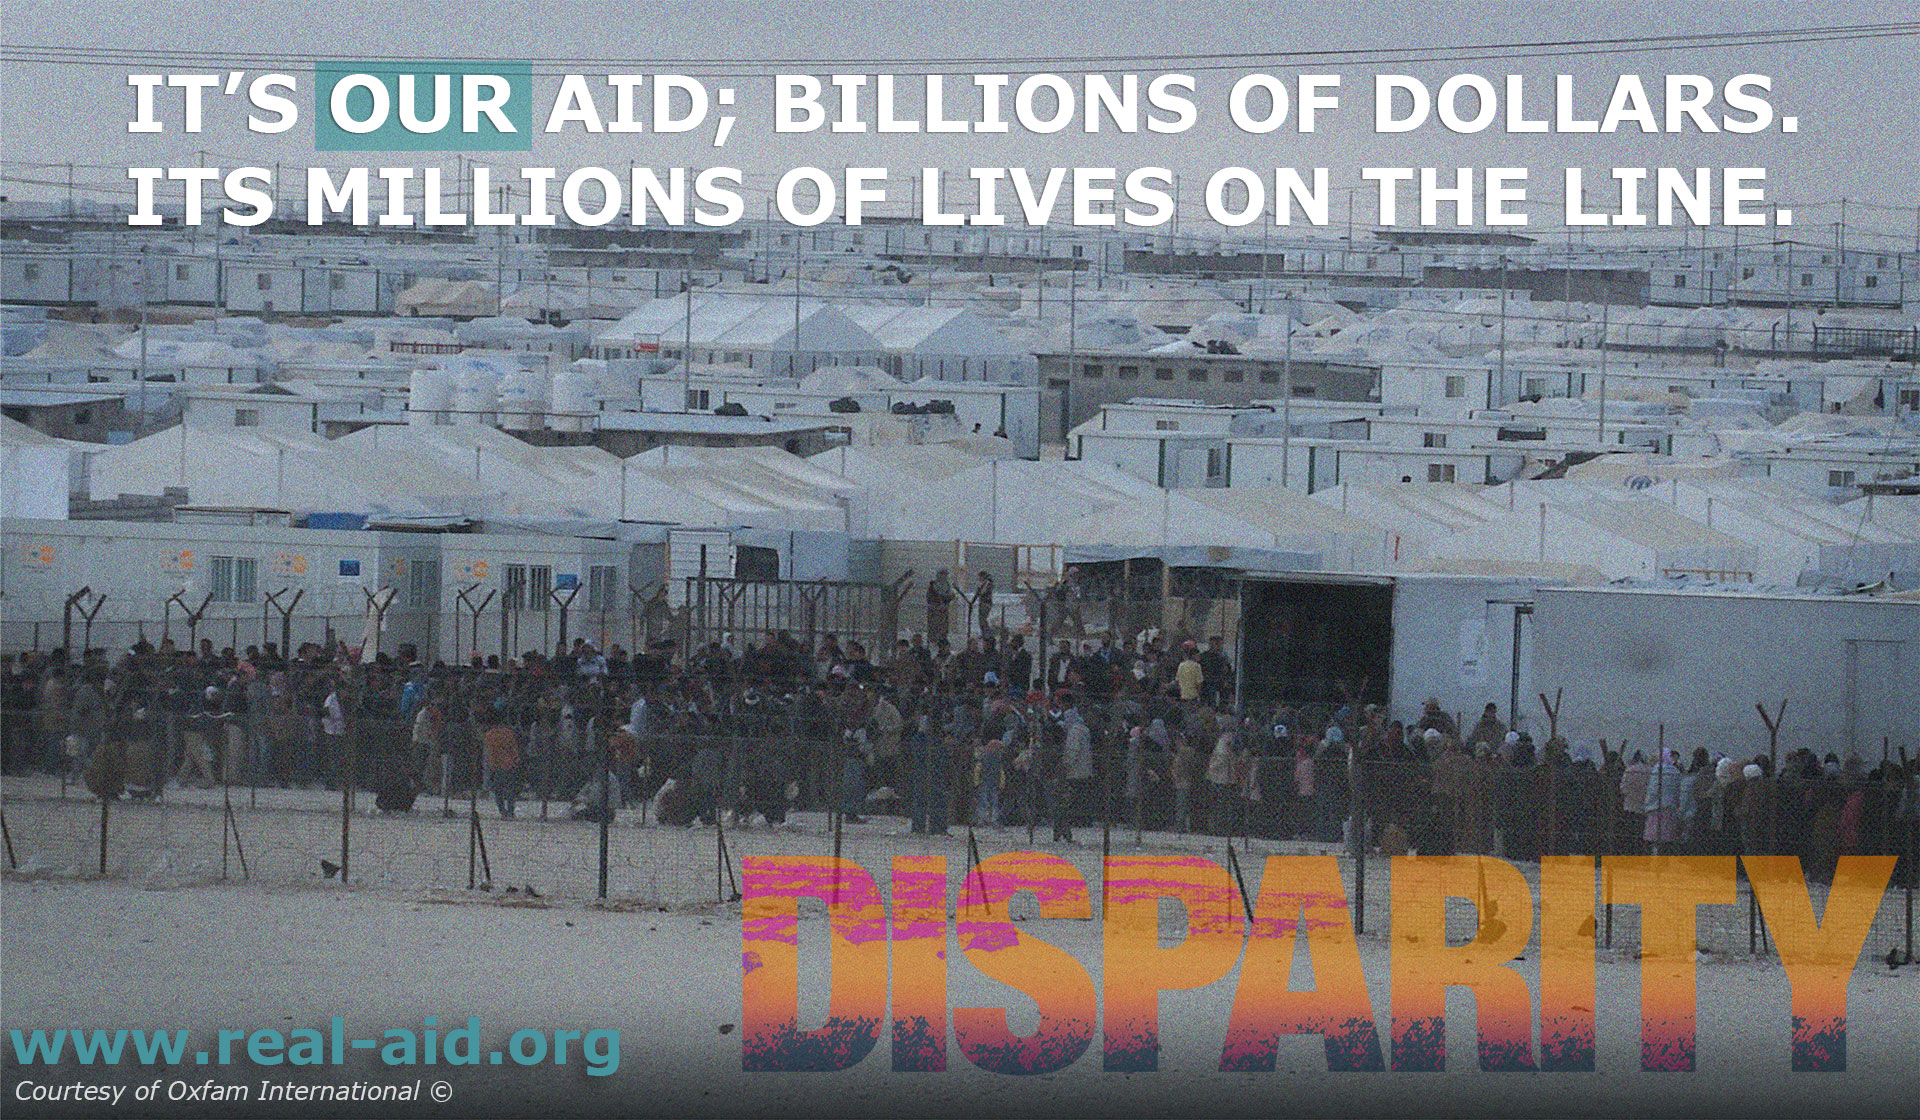 Disparity Film Poster, Its our aid billions of dollars text, Refugee camp with large number of people image